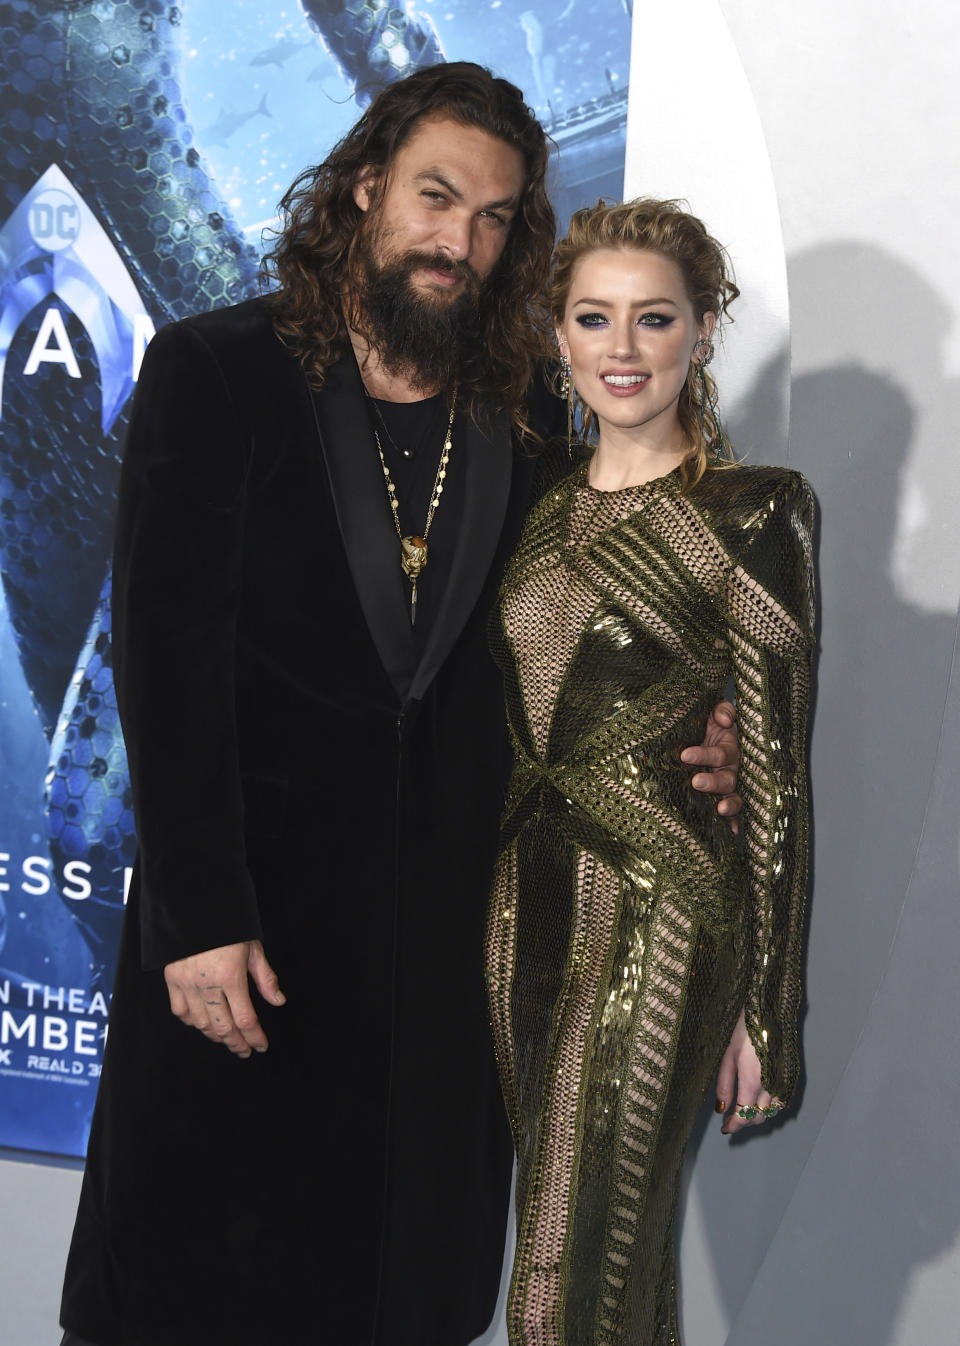 Jason Momoa, left, and Amber Heard arrive at the premiere of "Aquaman" at TCL Chinese Theatre on Wednesday, Dec. 12, 2018, in Los Angeles. (Photo by Jordan Strauss/Invision/AP)